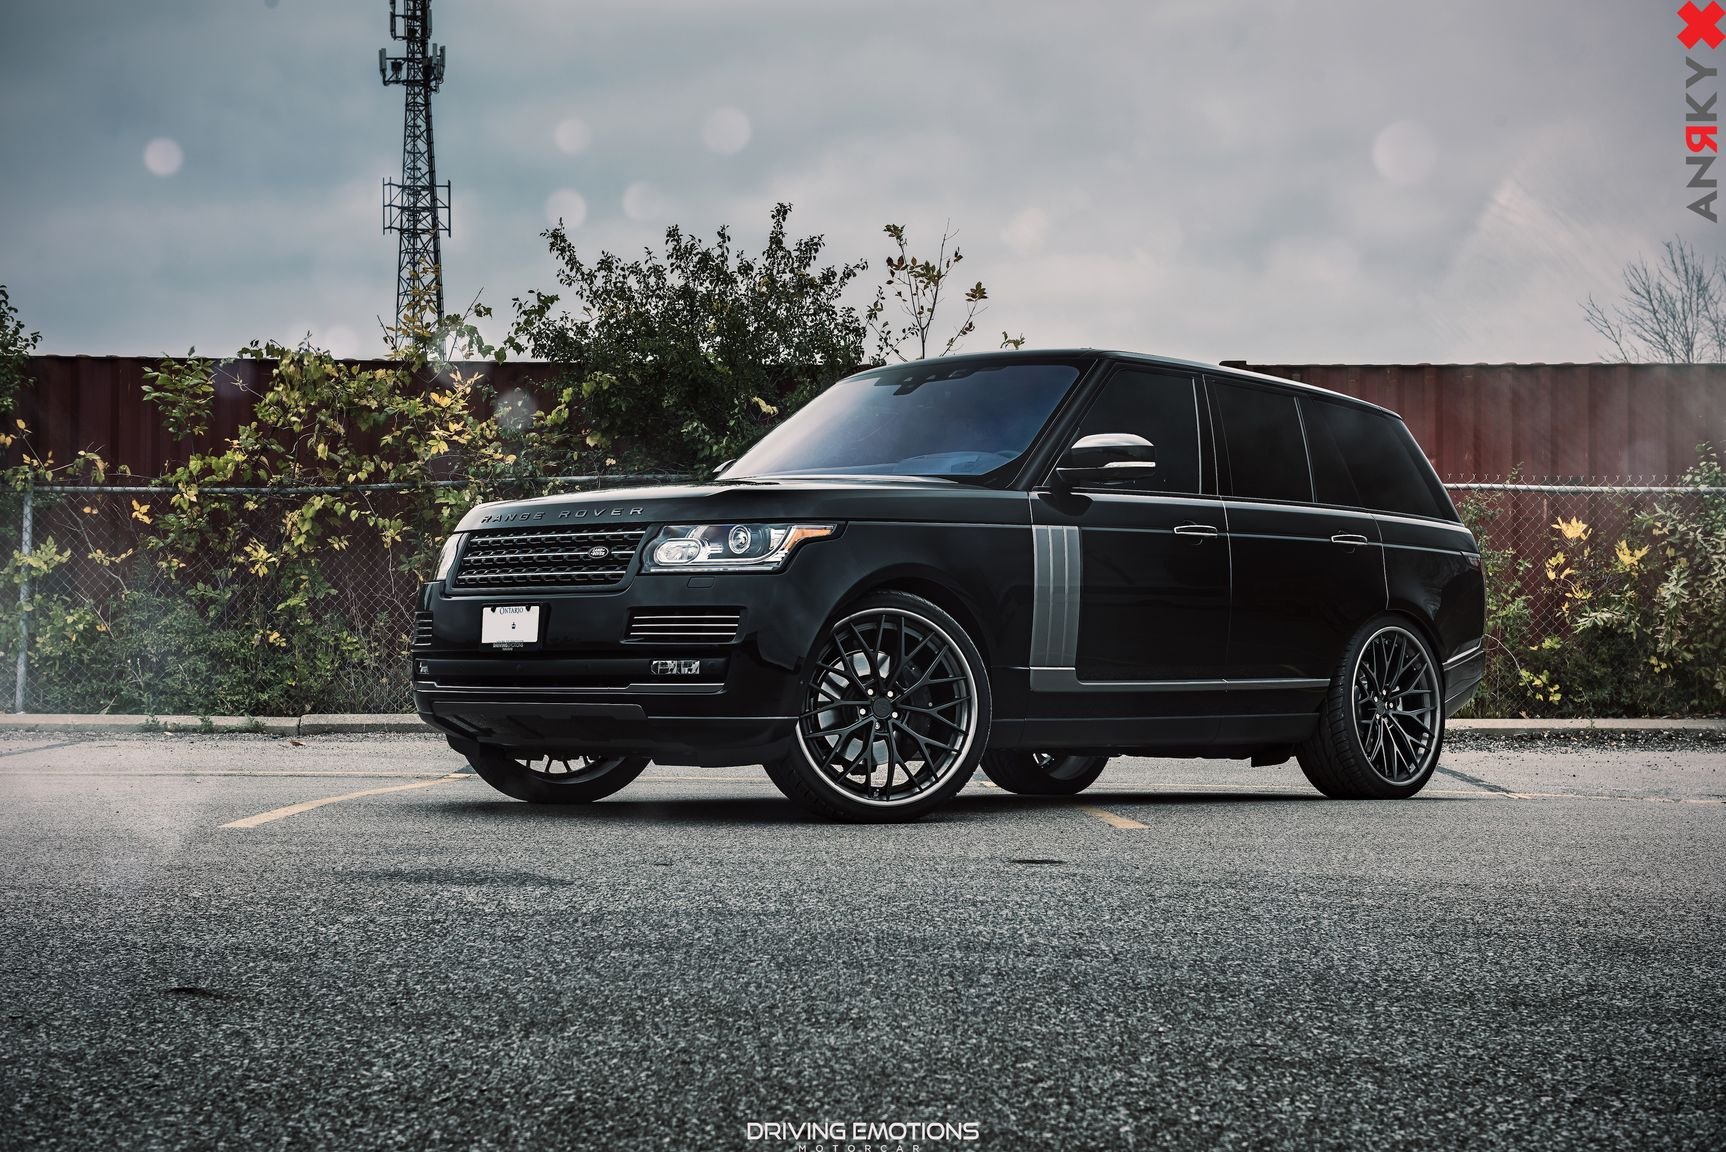 Front Bumper with Fog Lights on Black Range Rover - Photo by Anrky Wheels